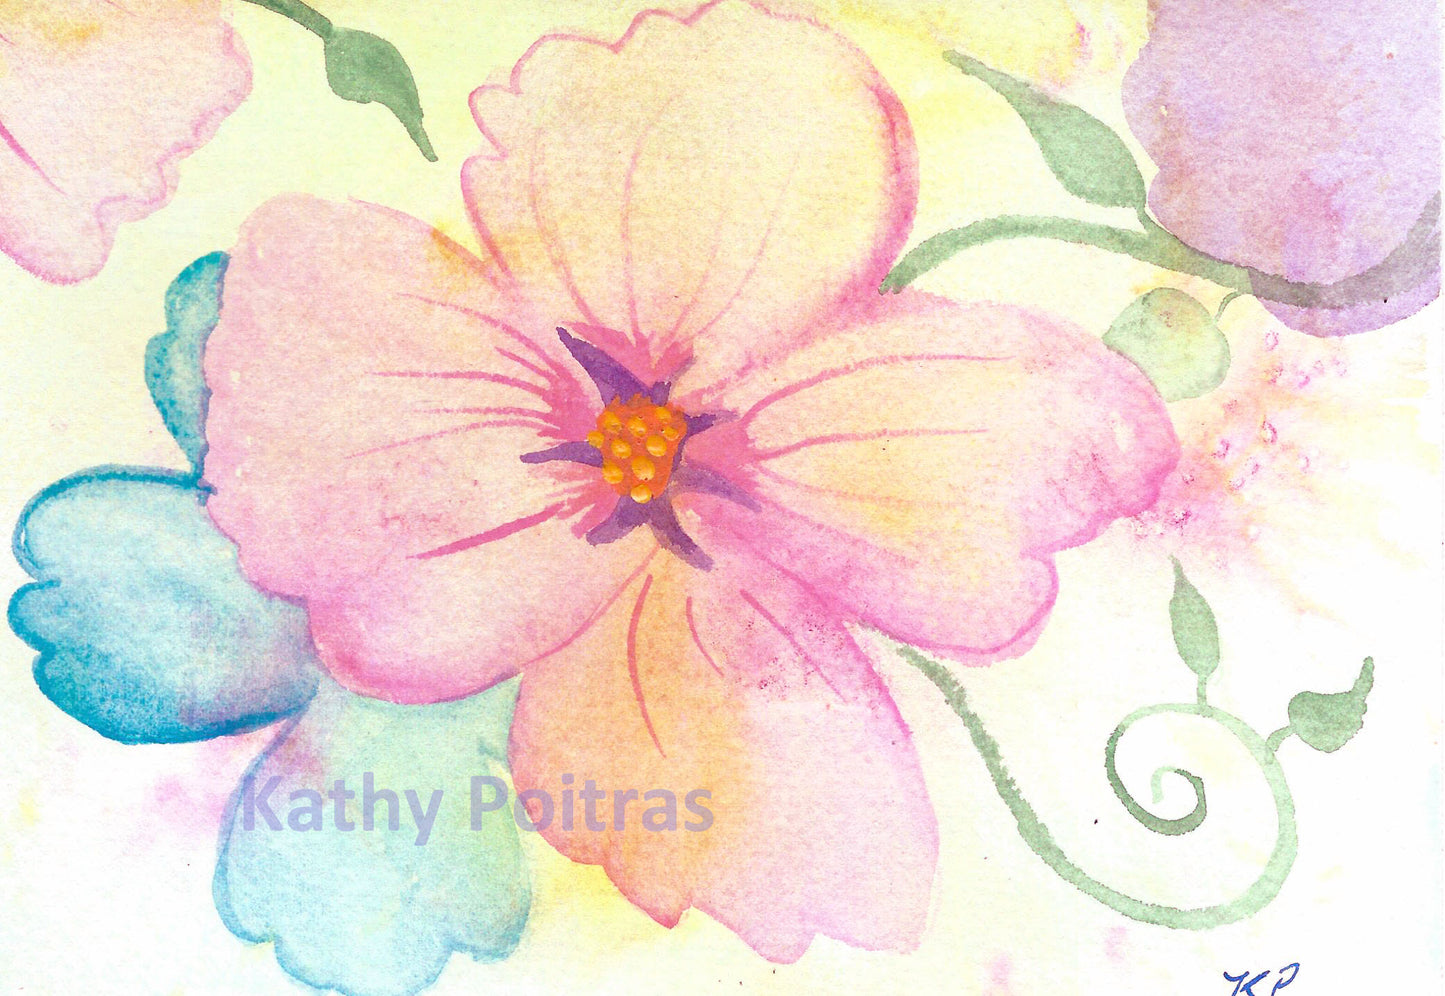  watercolor painting of abstract pink,  blossom with swirly vines and leaves against a bright wash background.   by artist Kathy Poitras